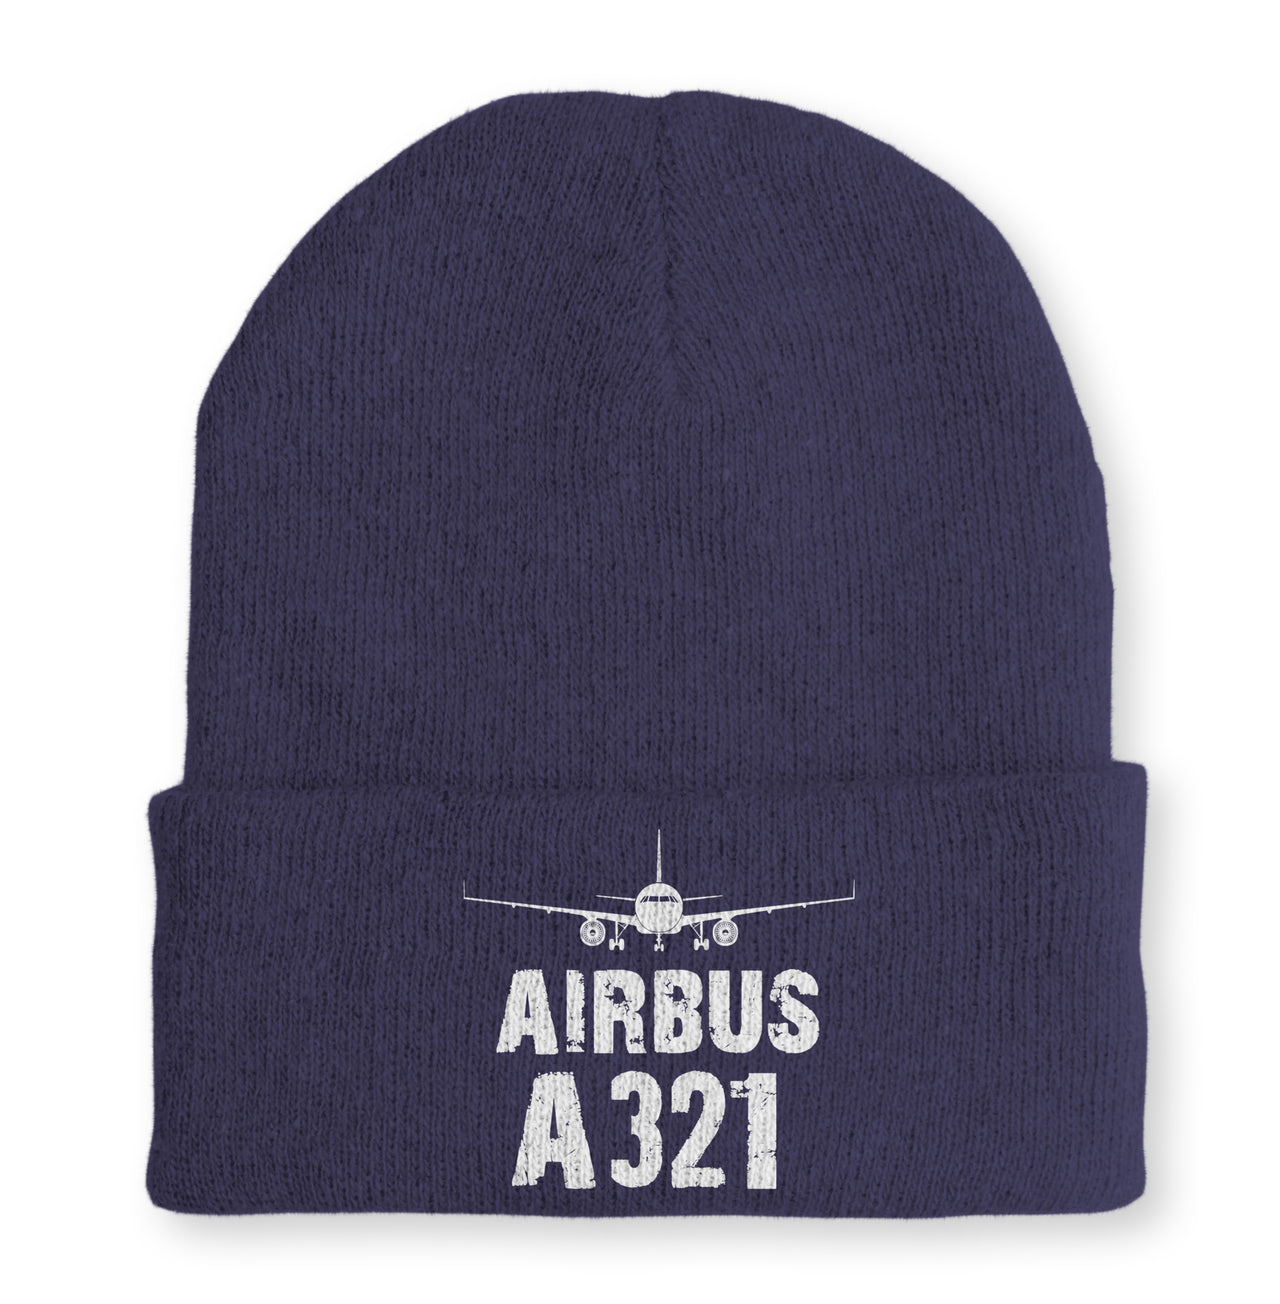 Airbus A321 & Plane Embroidered Beanies